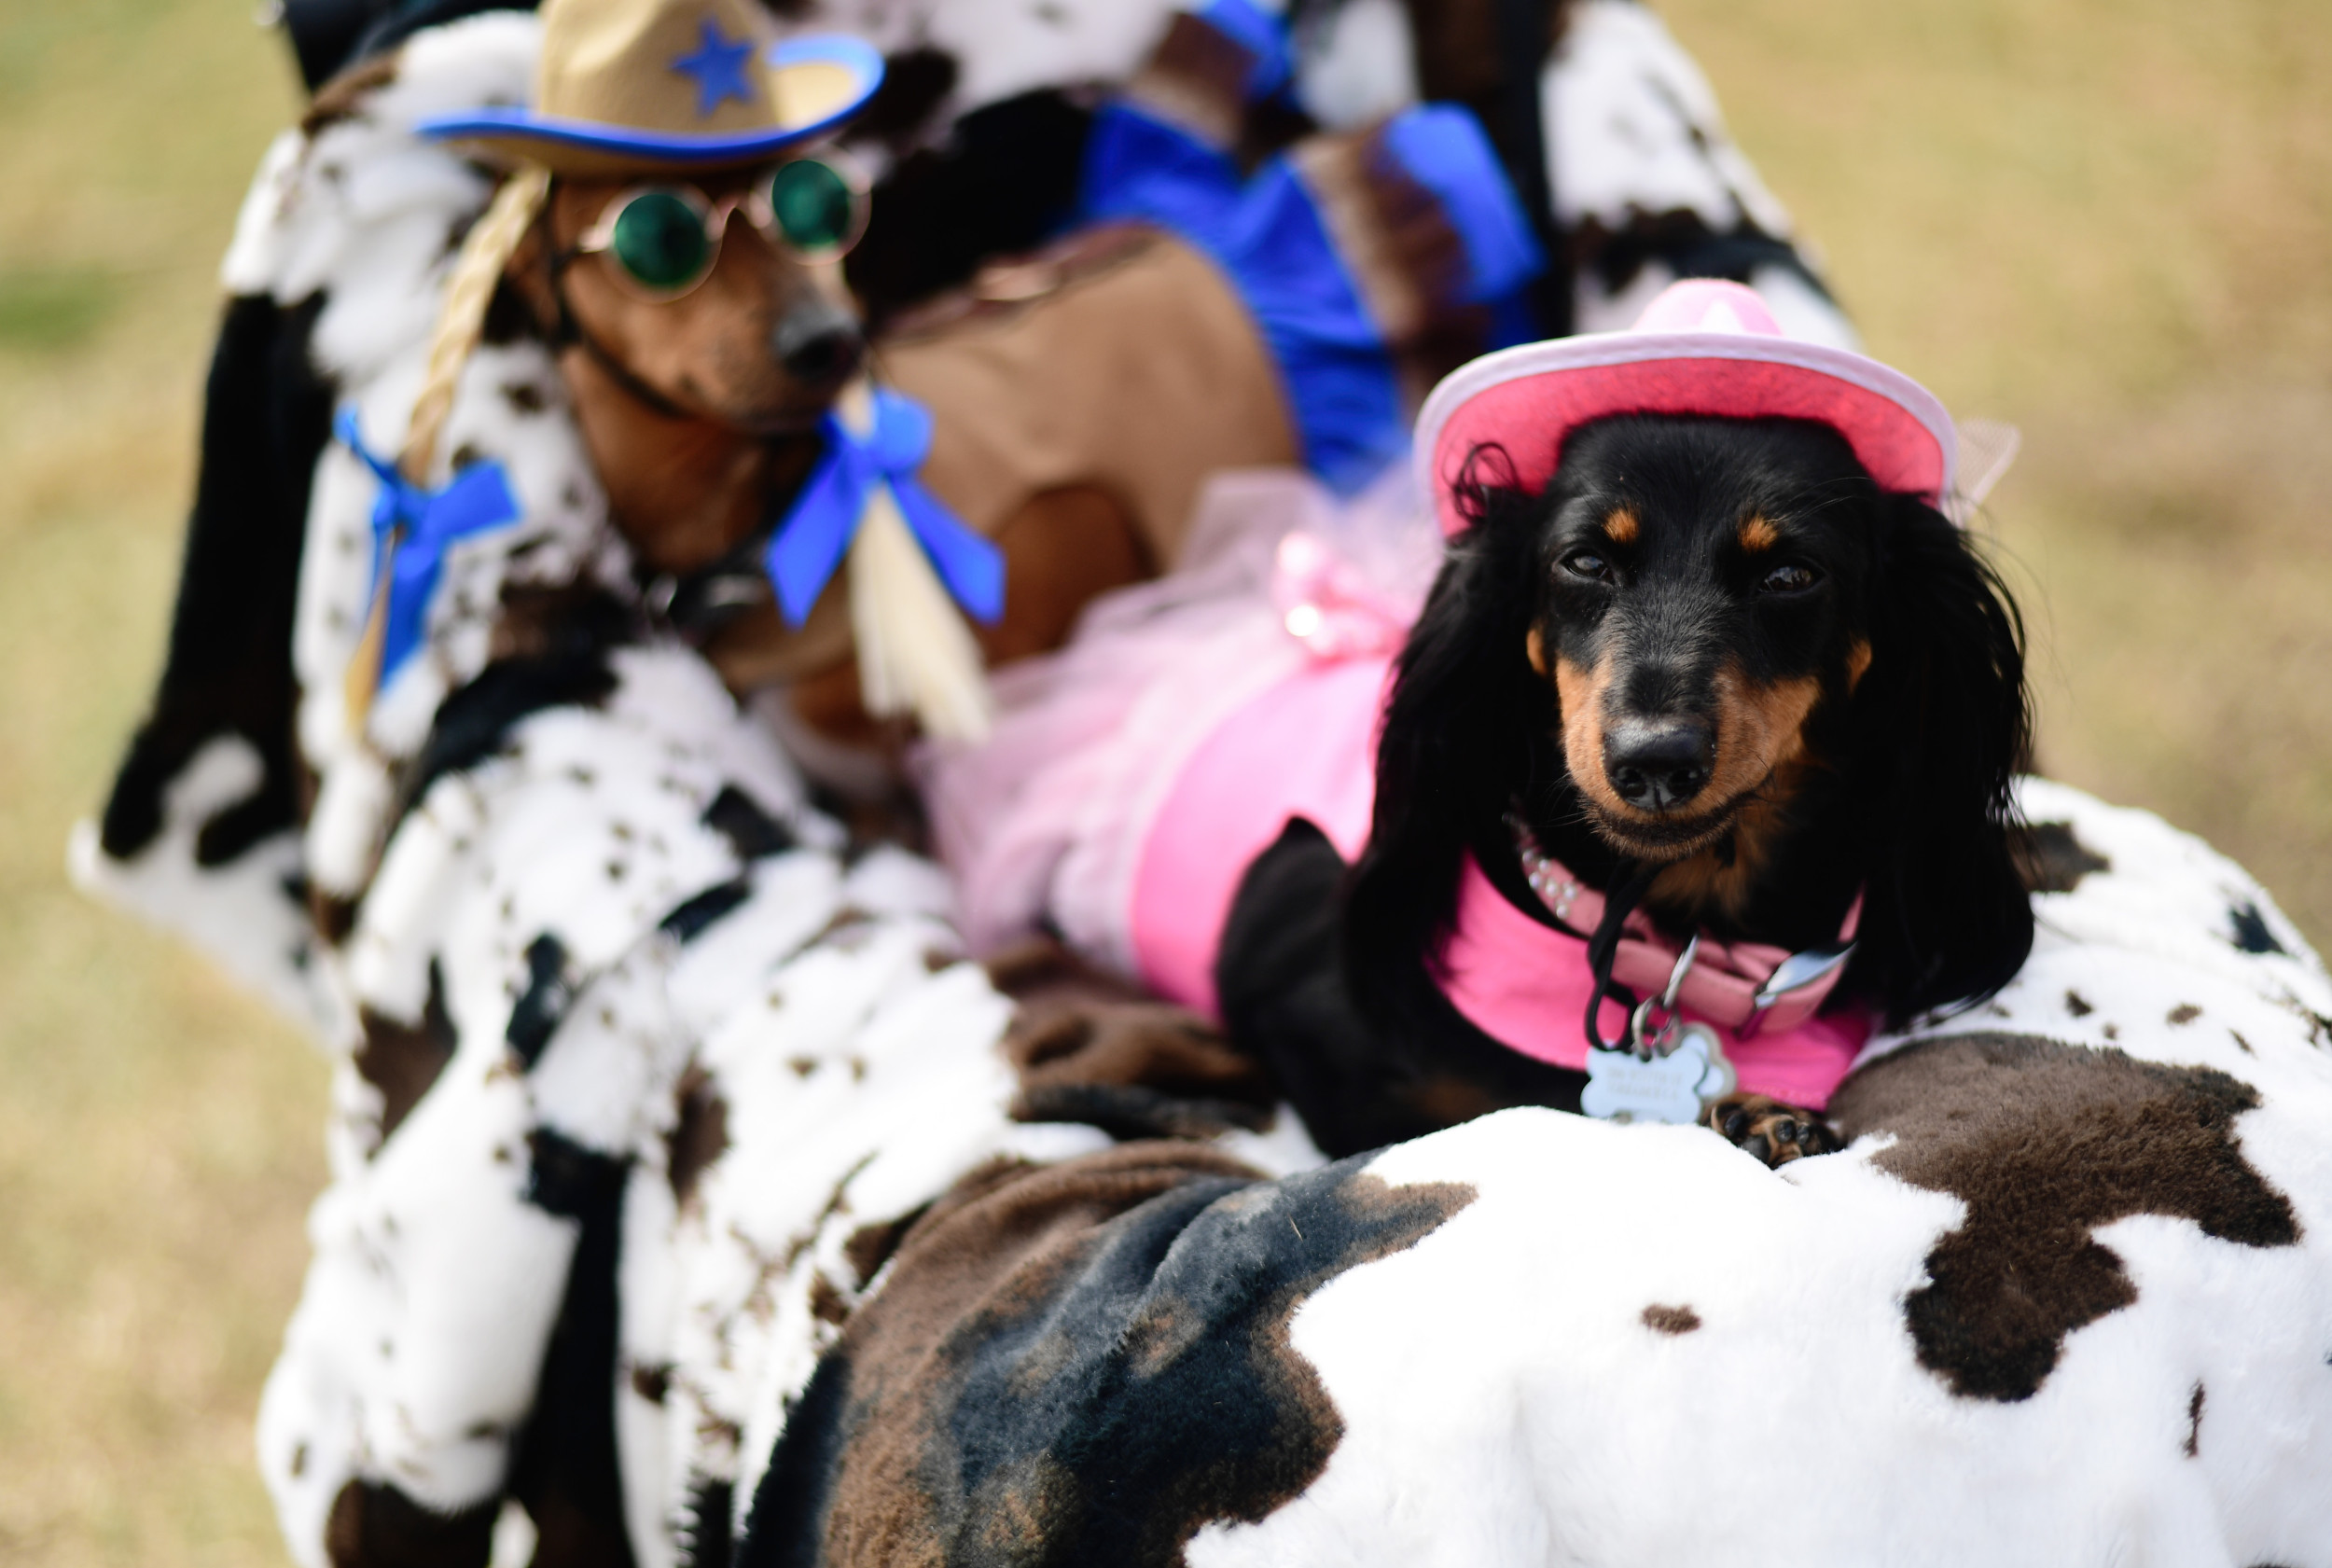 Best Halloween Dog Costumes: 12 Options to Dress Up Your Pet